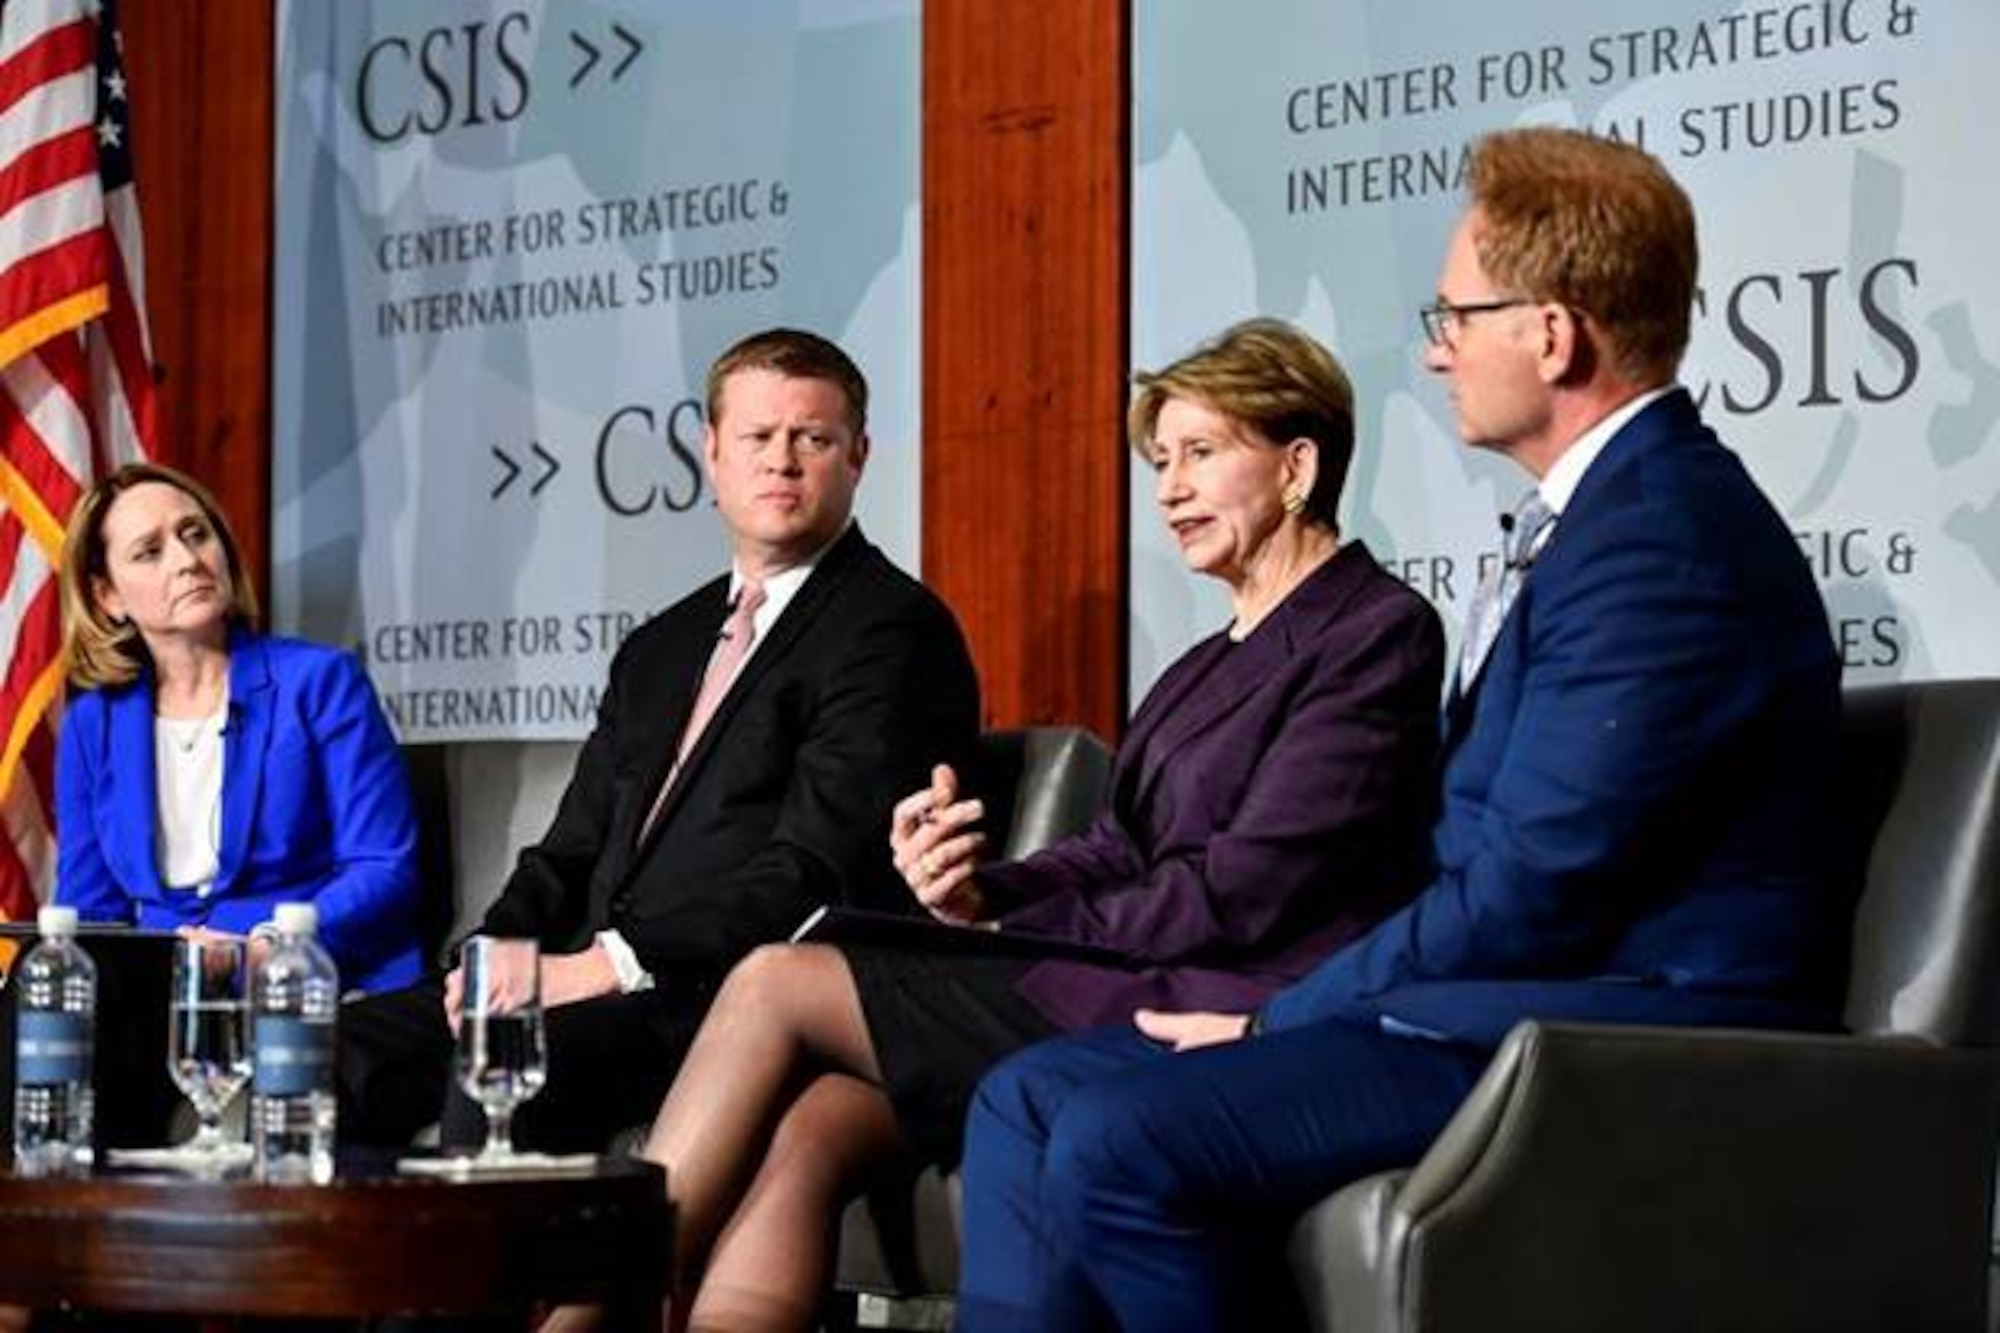 Secretary of the Air Force Barbara M. Barrett, second from right, delivers remarks during a panel discussion with Army Secretary Ryan McCarthy, second from left, and acting Navy Secretary Thomas Modly, right, hosted by Kathleen Hicks, left, senior vice president of the think tank Center for Strategic and International Studies, at the center in Washington, D.C., Feb. 21, 2020. The service secretaries discussed their respective department’s posture and budget proposals. (U.S. Air Force photo by Eric Dietrich)